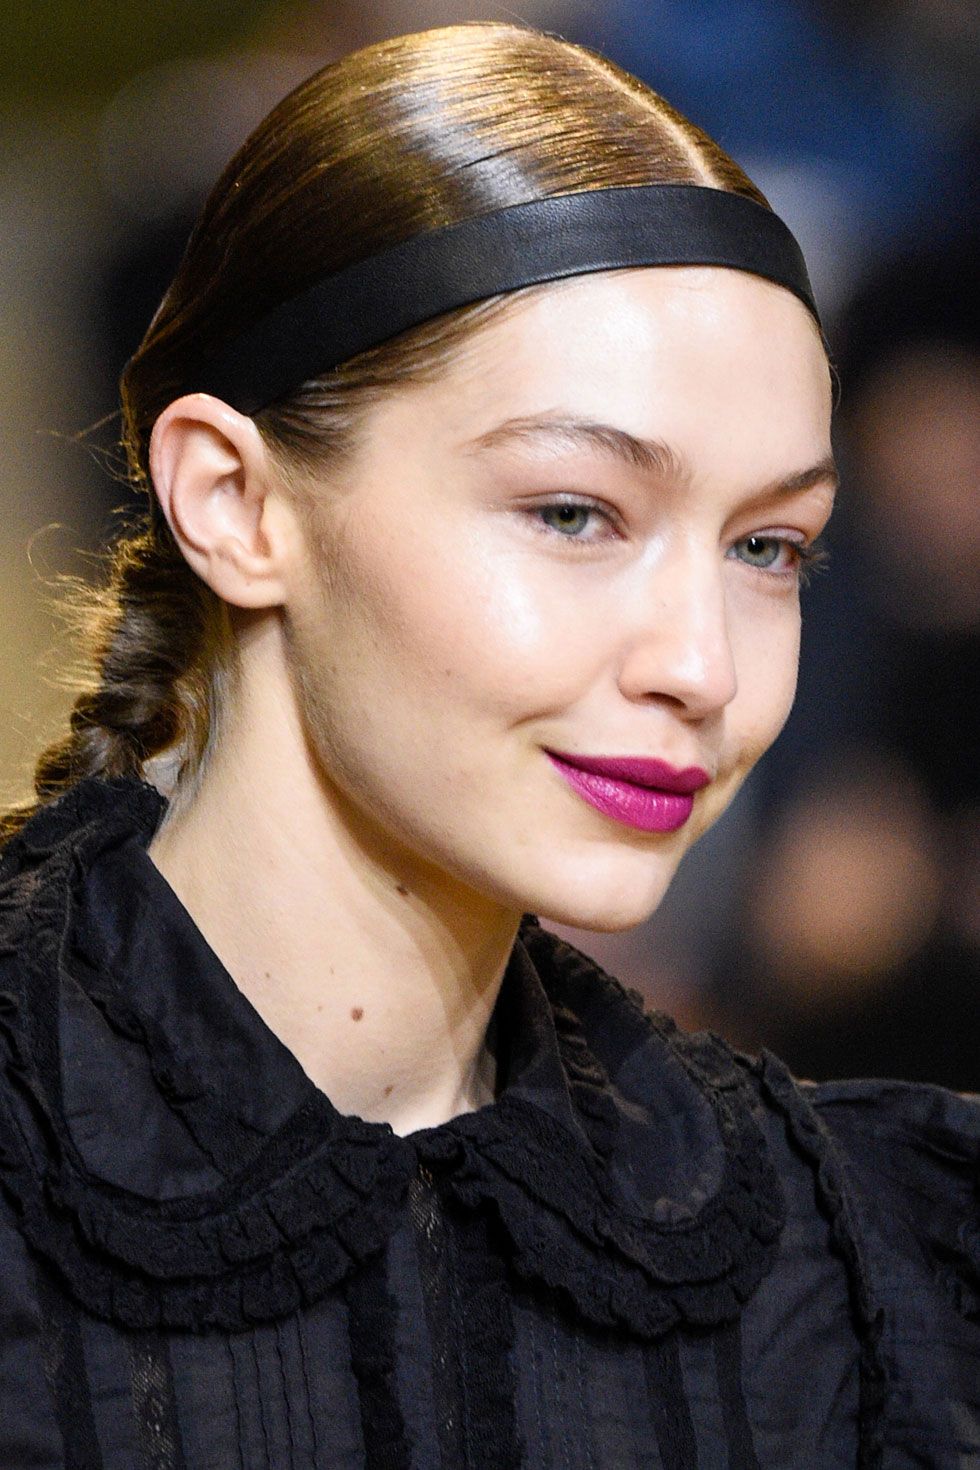 <p><strong data-redactor-tag="strong" data-verified="redactor">Il Look: </strong>Il rossetto fuxia sull'outfit sportivo.</p>